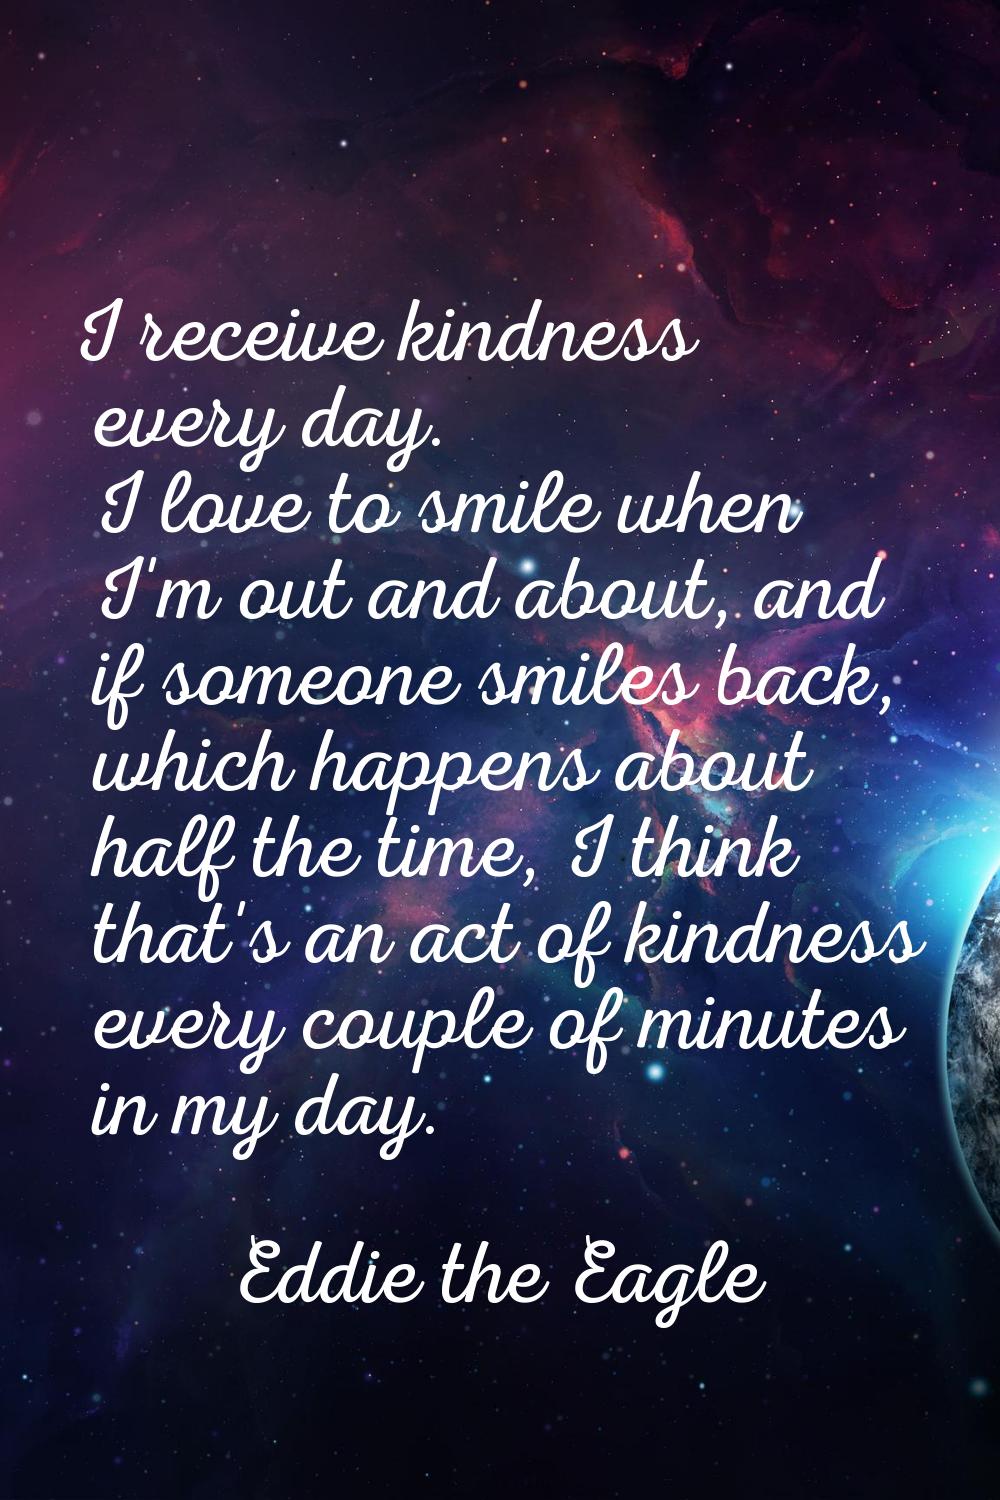 I receive kindness every day. I love to smile when I'm out and about, and if someone smiles back, w